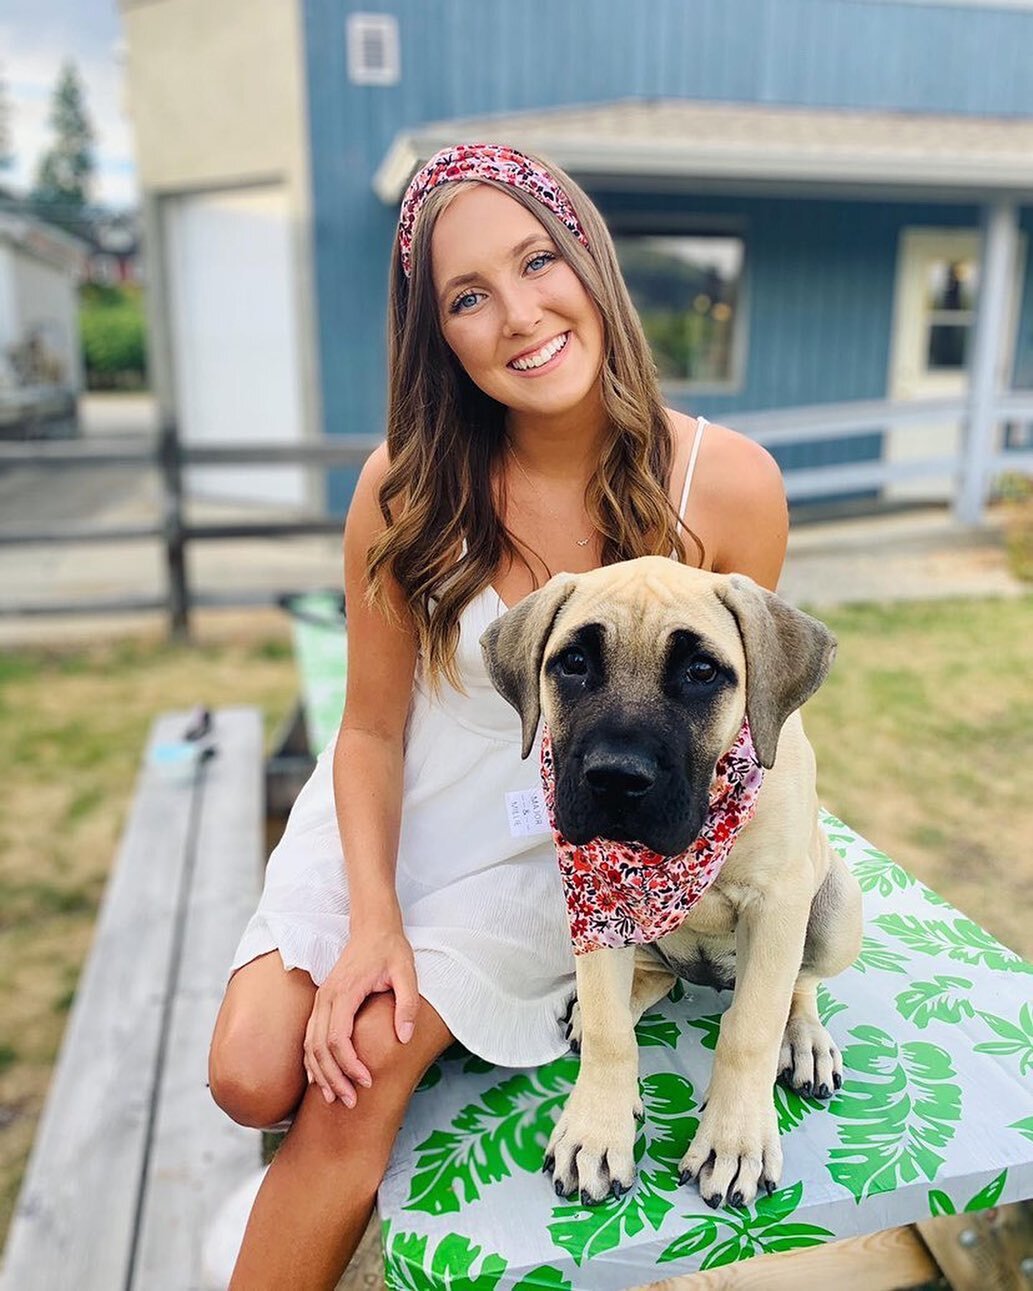 Mommy and Me 💗

We have restocked this beautiful matching set perfect for Valentines and Spring! This headband is incredibly soft and comfortable 💗

Checkout our Mommy and Me section on our website to see other prints that you can match your pup wi